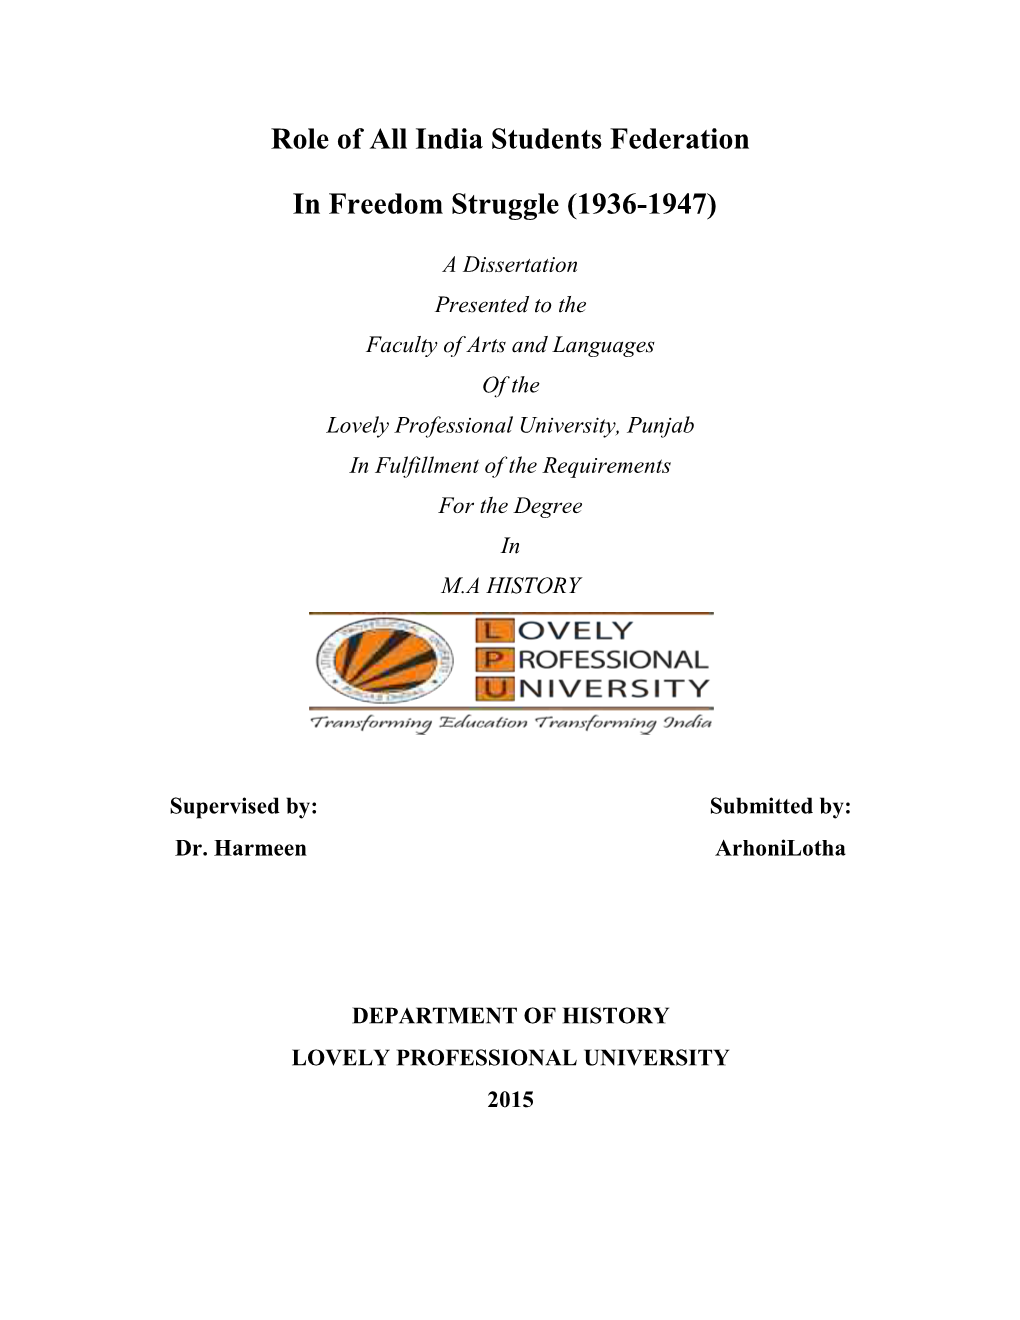 Role of All India Students Federation in Freedom Struggle (1936-1947)